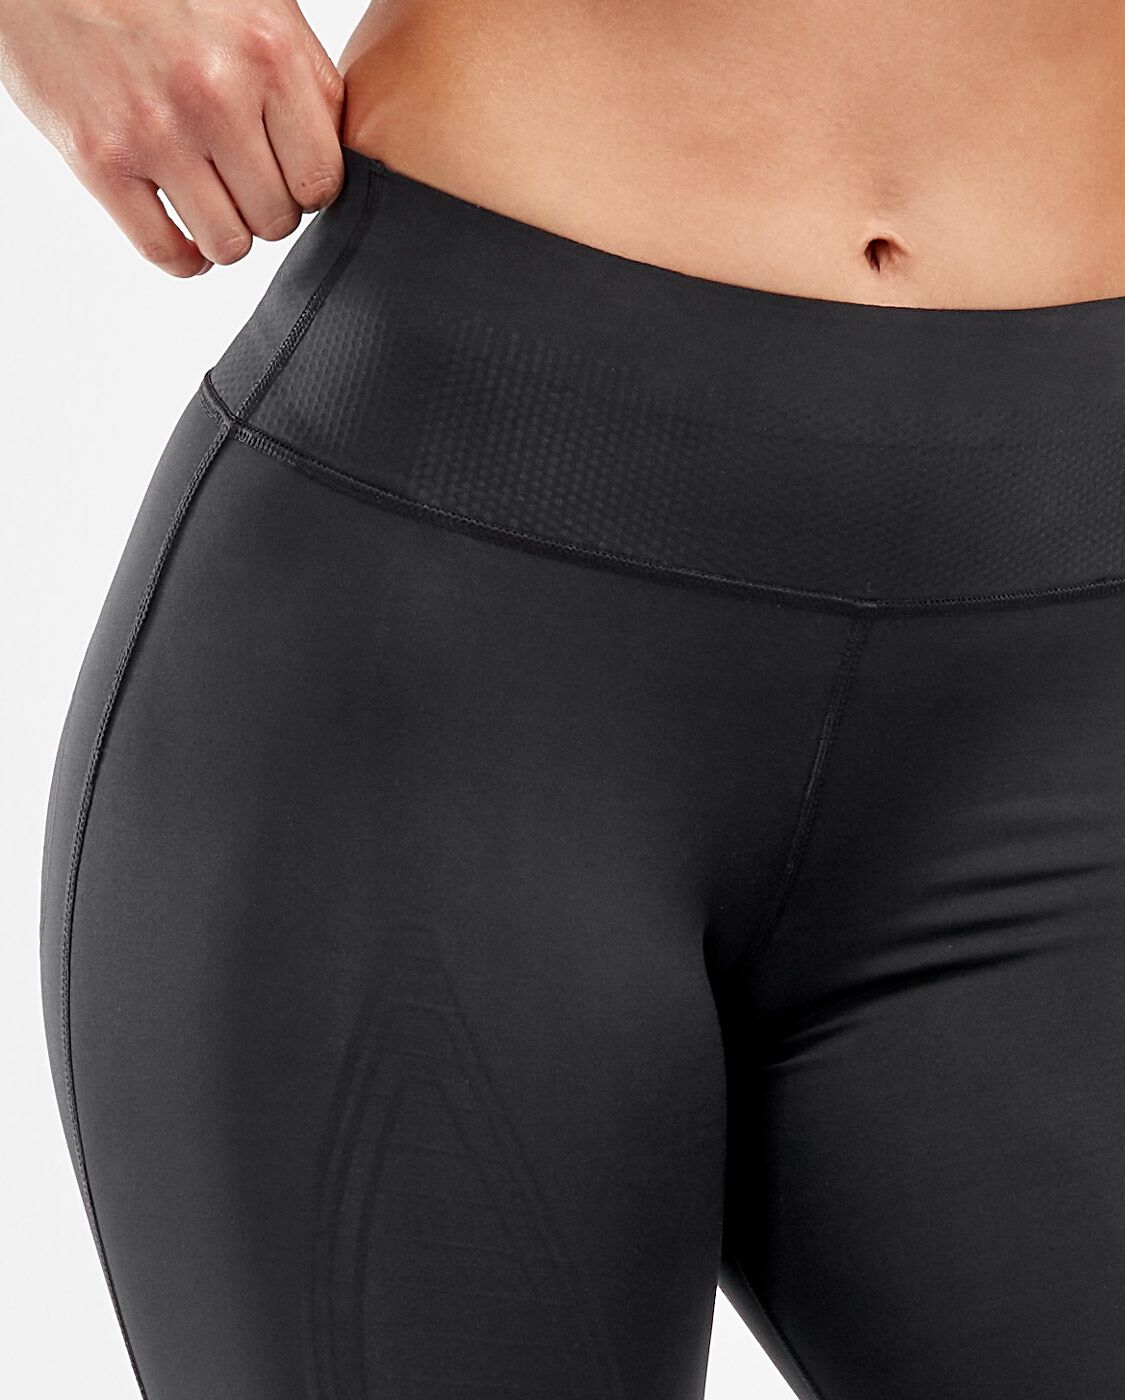 2XU South Africa - Women's Force Mid-Rise Compression Tights - Black/Nero